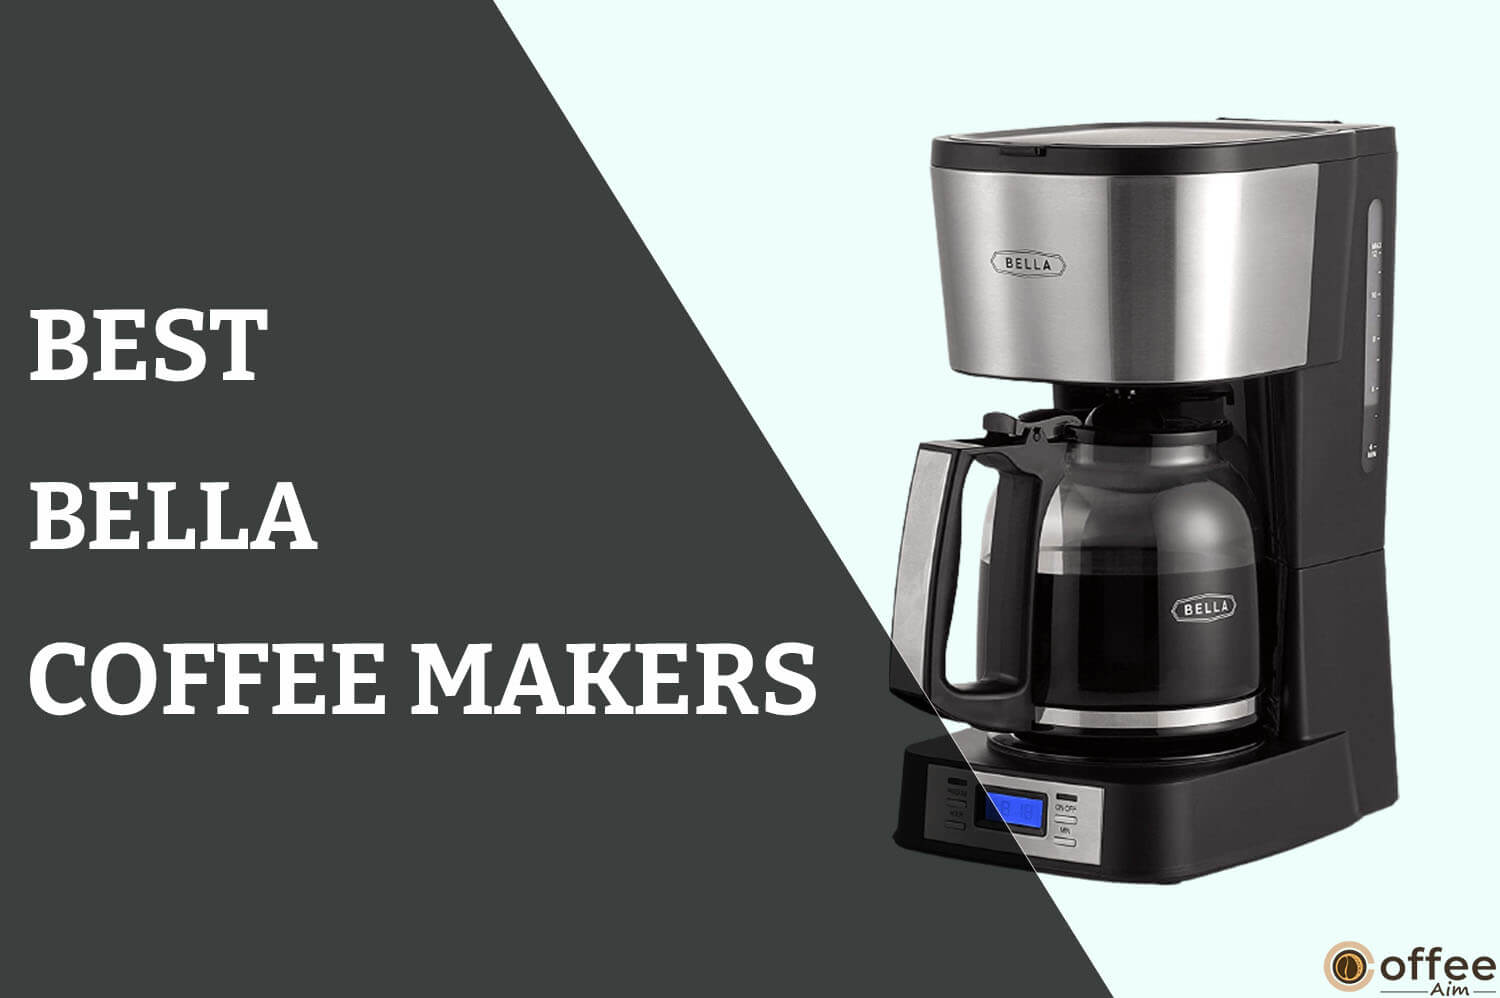 Featured image for the article "Best Bella Coffee Maker"